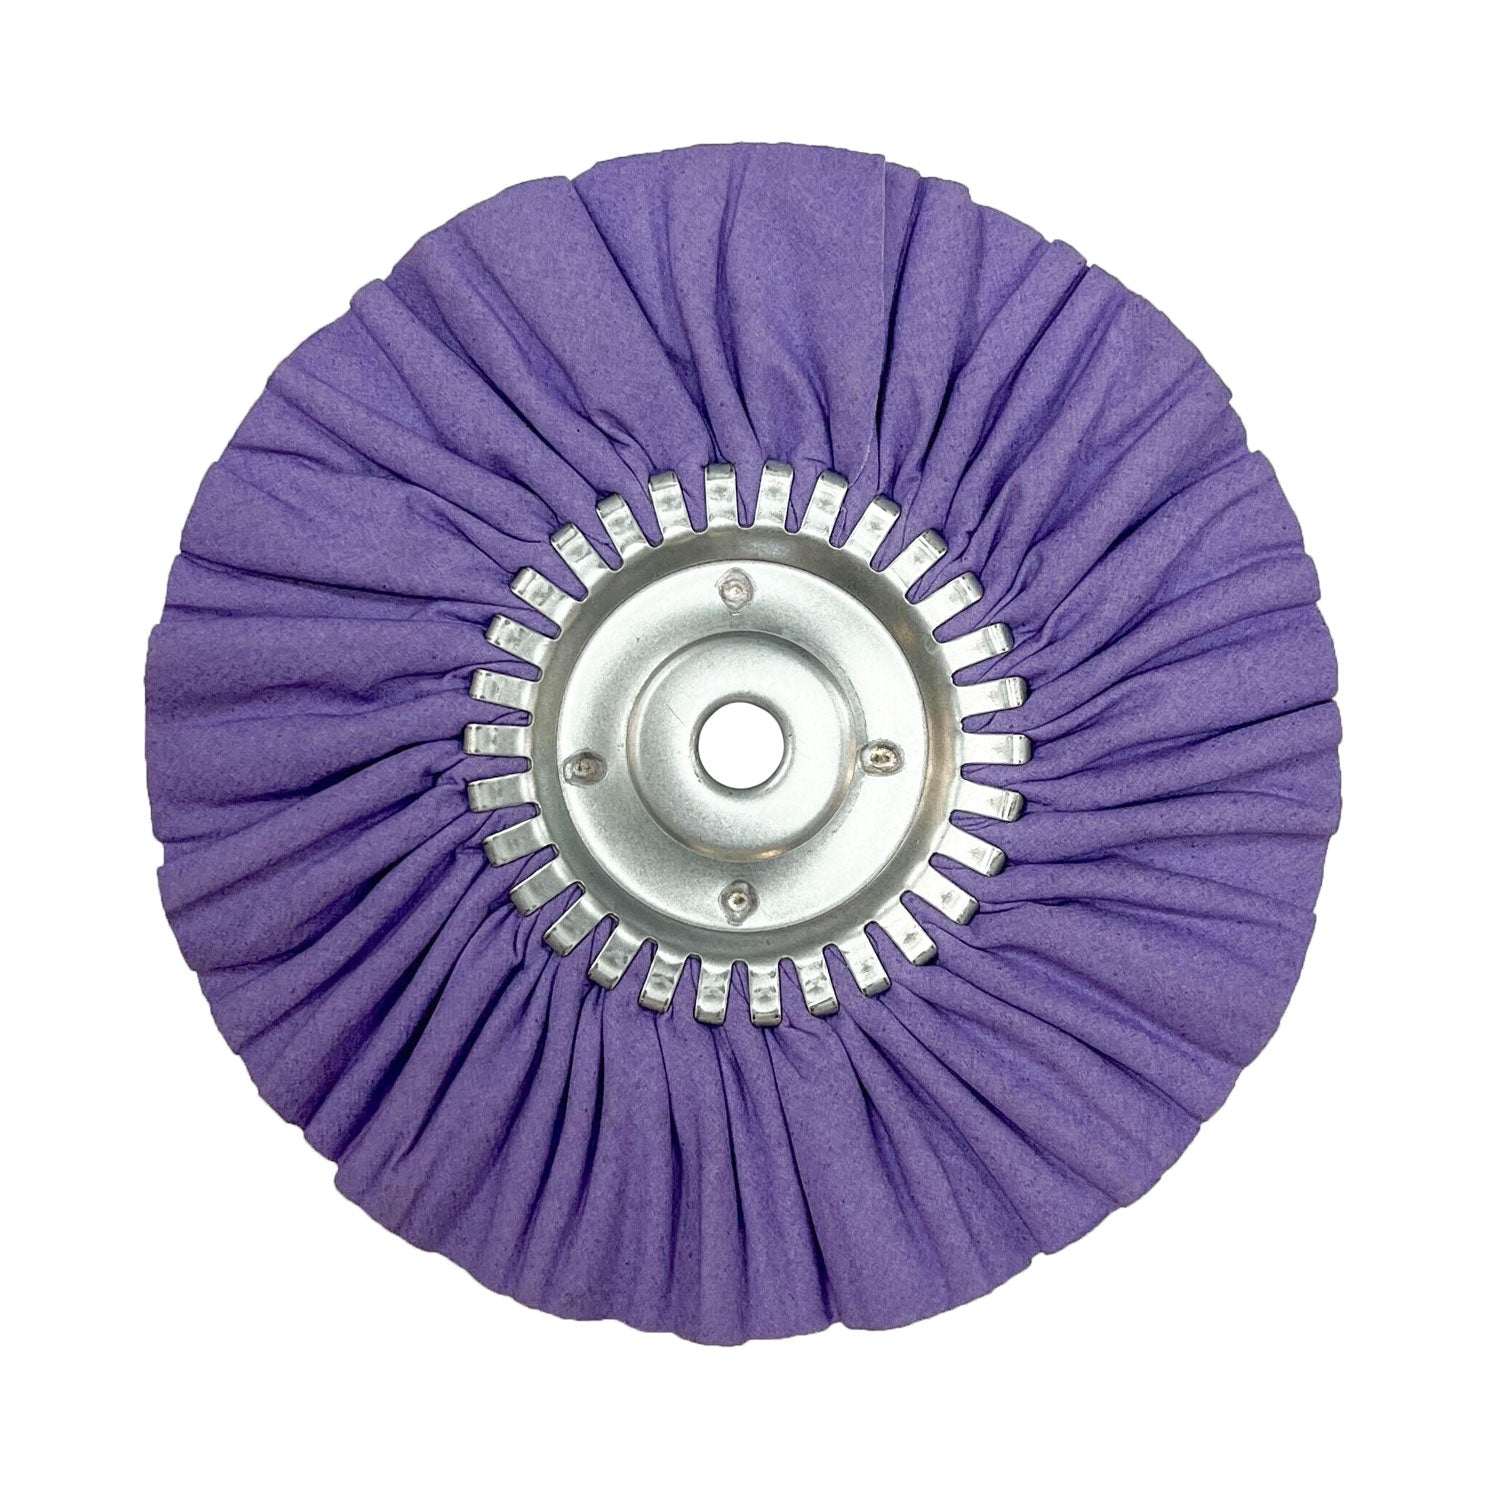 Elegant purple 9-inch Solid-Center Airway Buffing Wheel from Renegade Products USA, perfect for precision polishing and buffing tasks on a variety of surfaces.